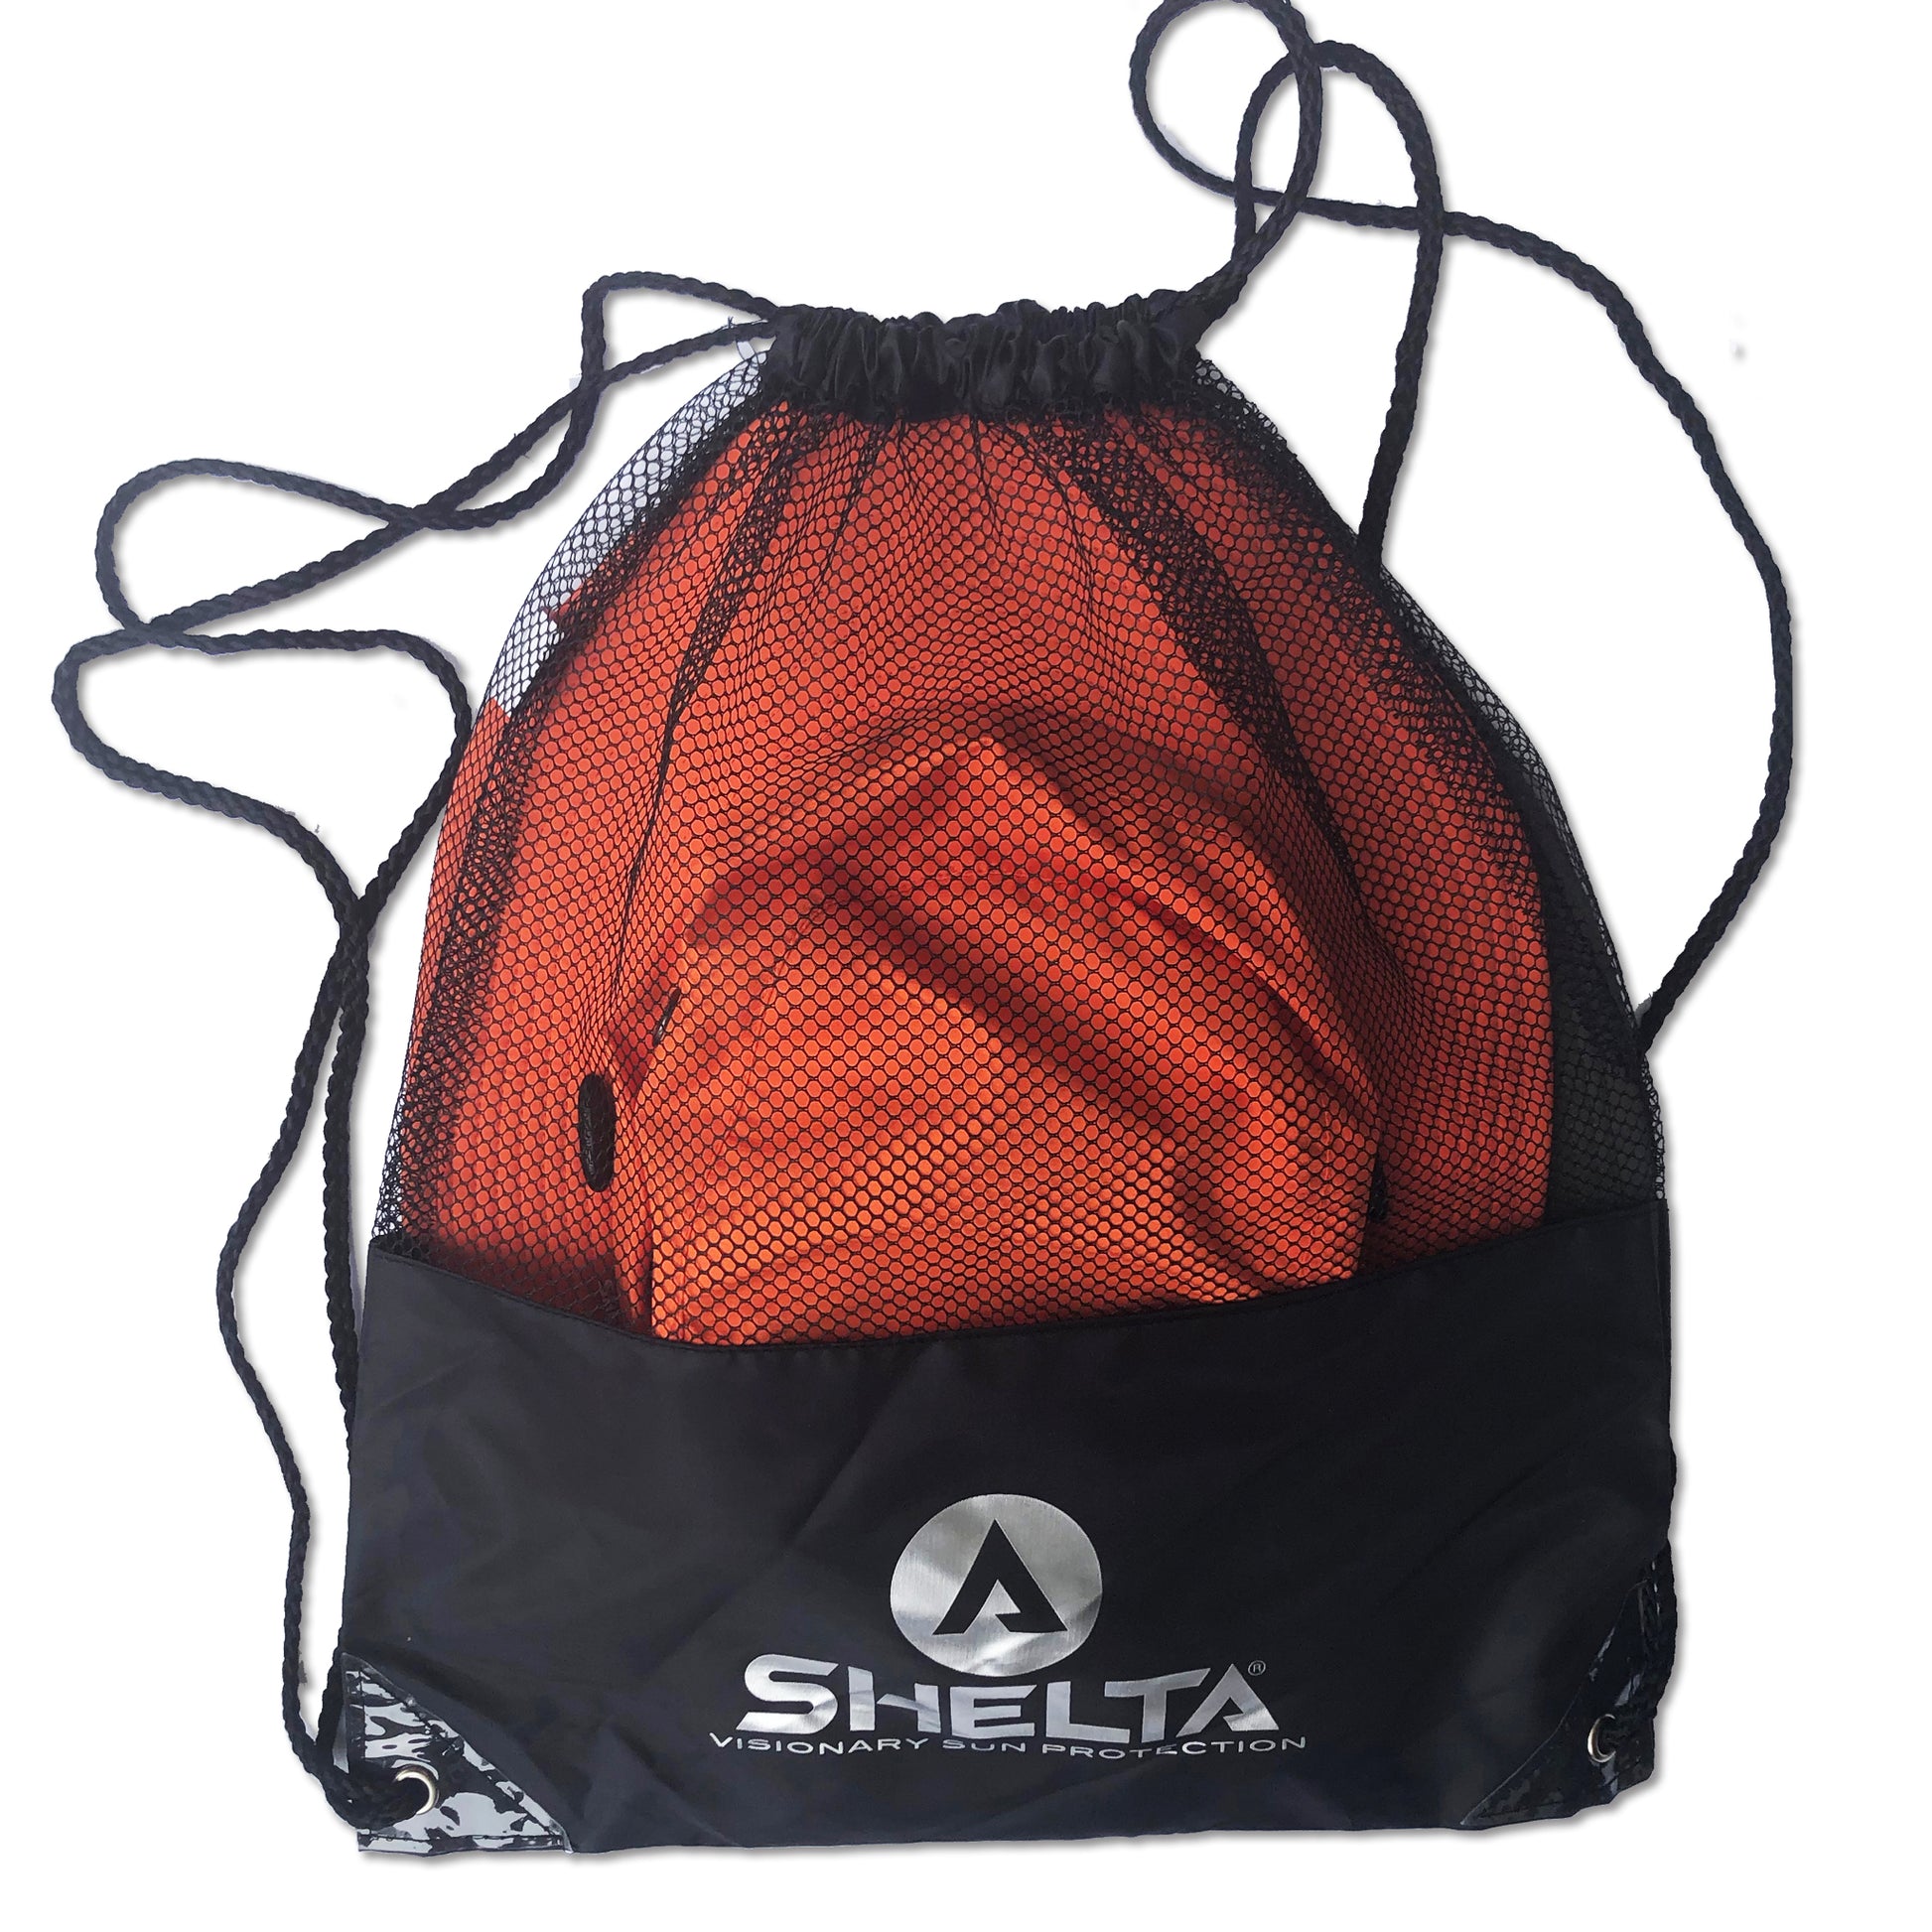 Small back pack to hold sun hat and accesorries